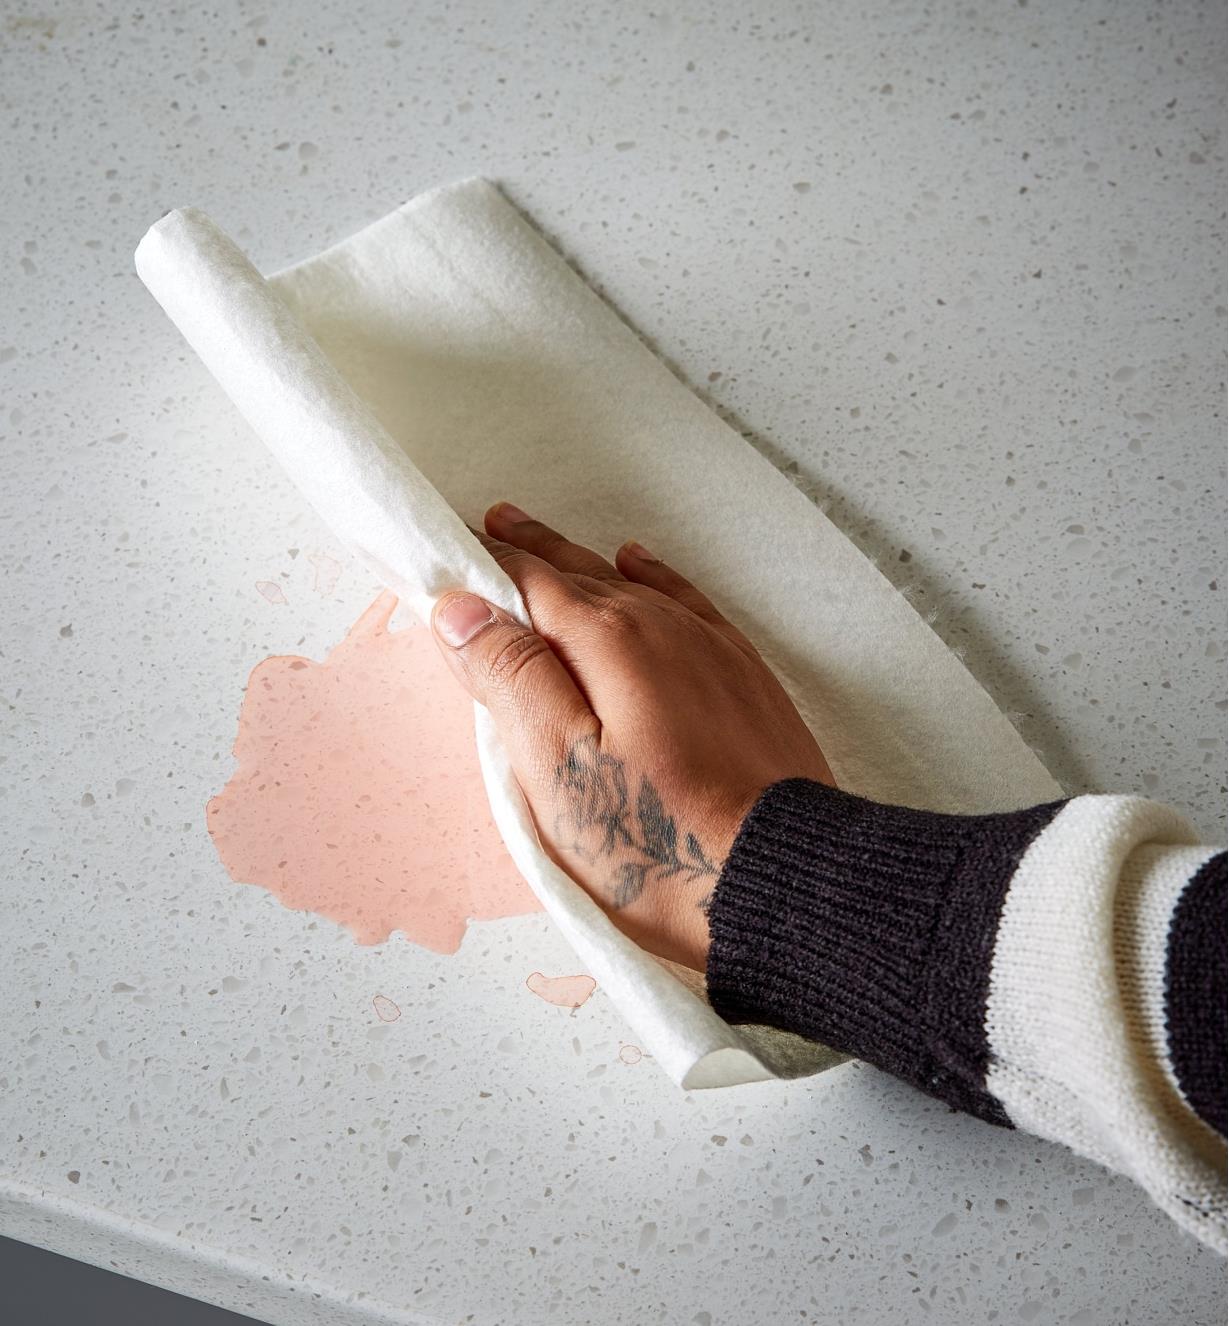 Wiping up a spill on a countertop using a reusable tear-off towel